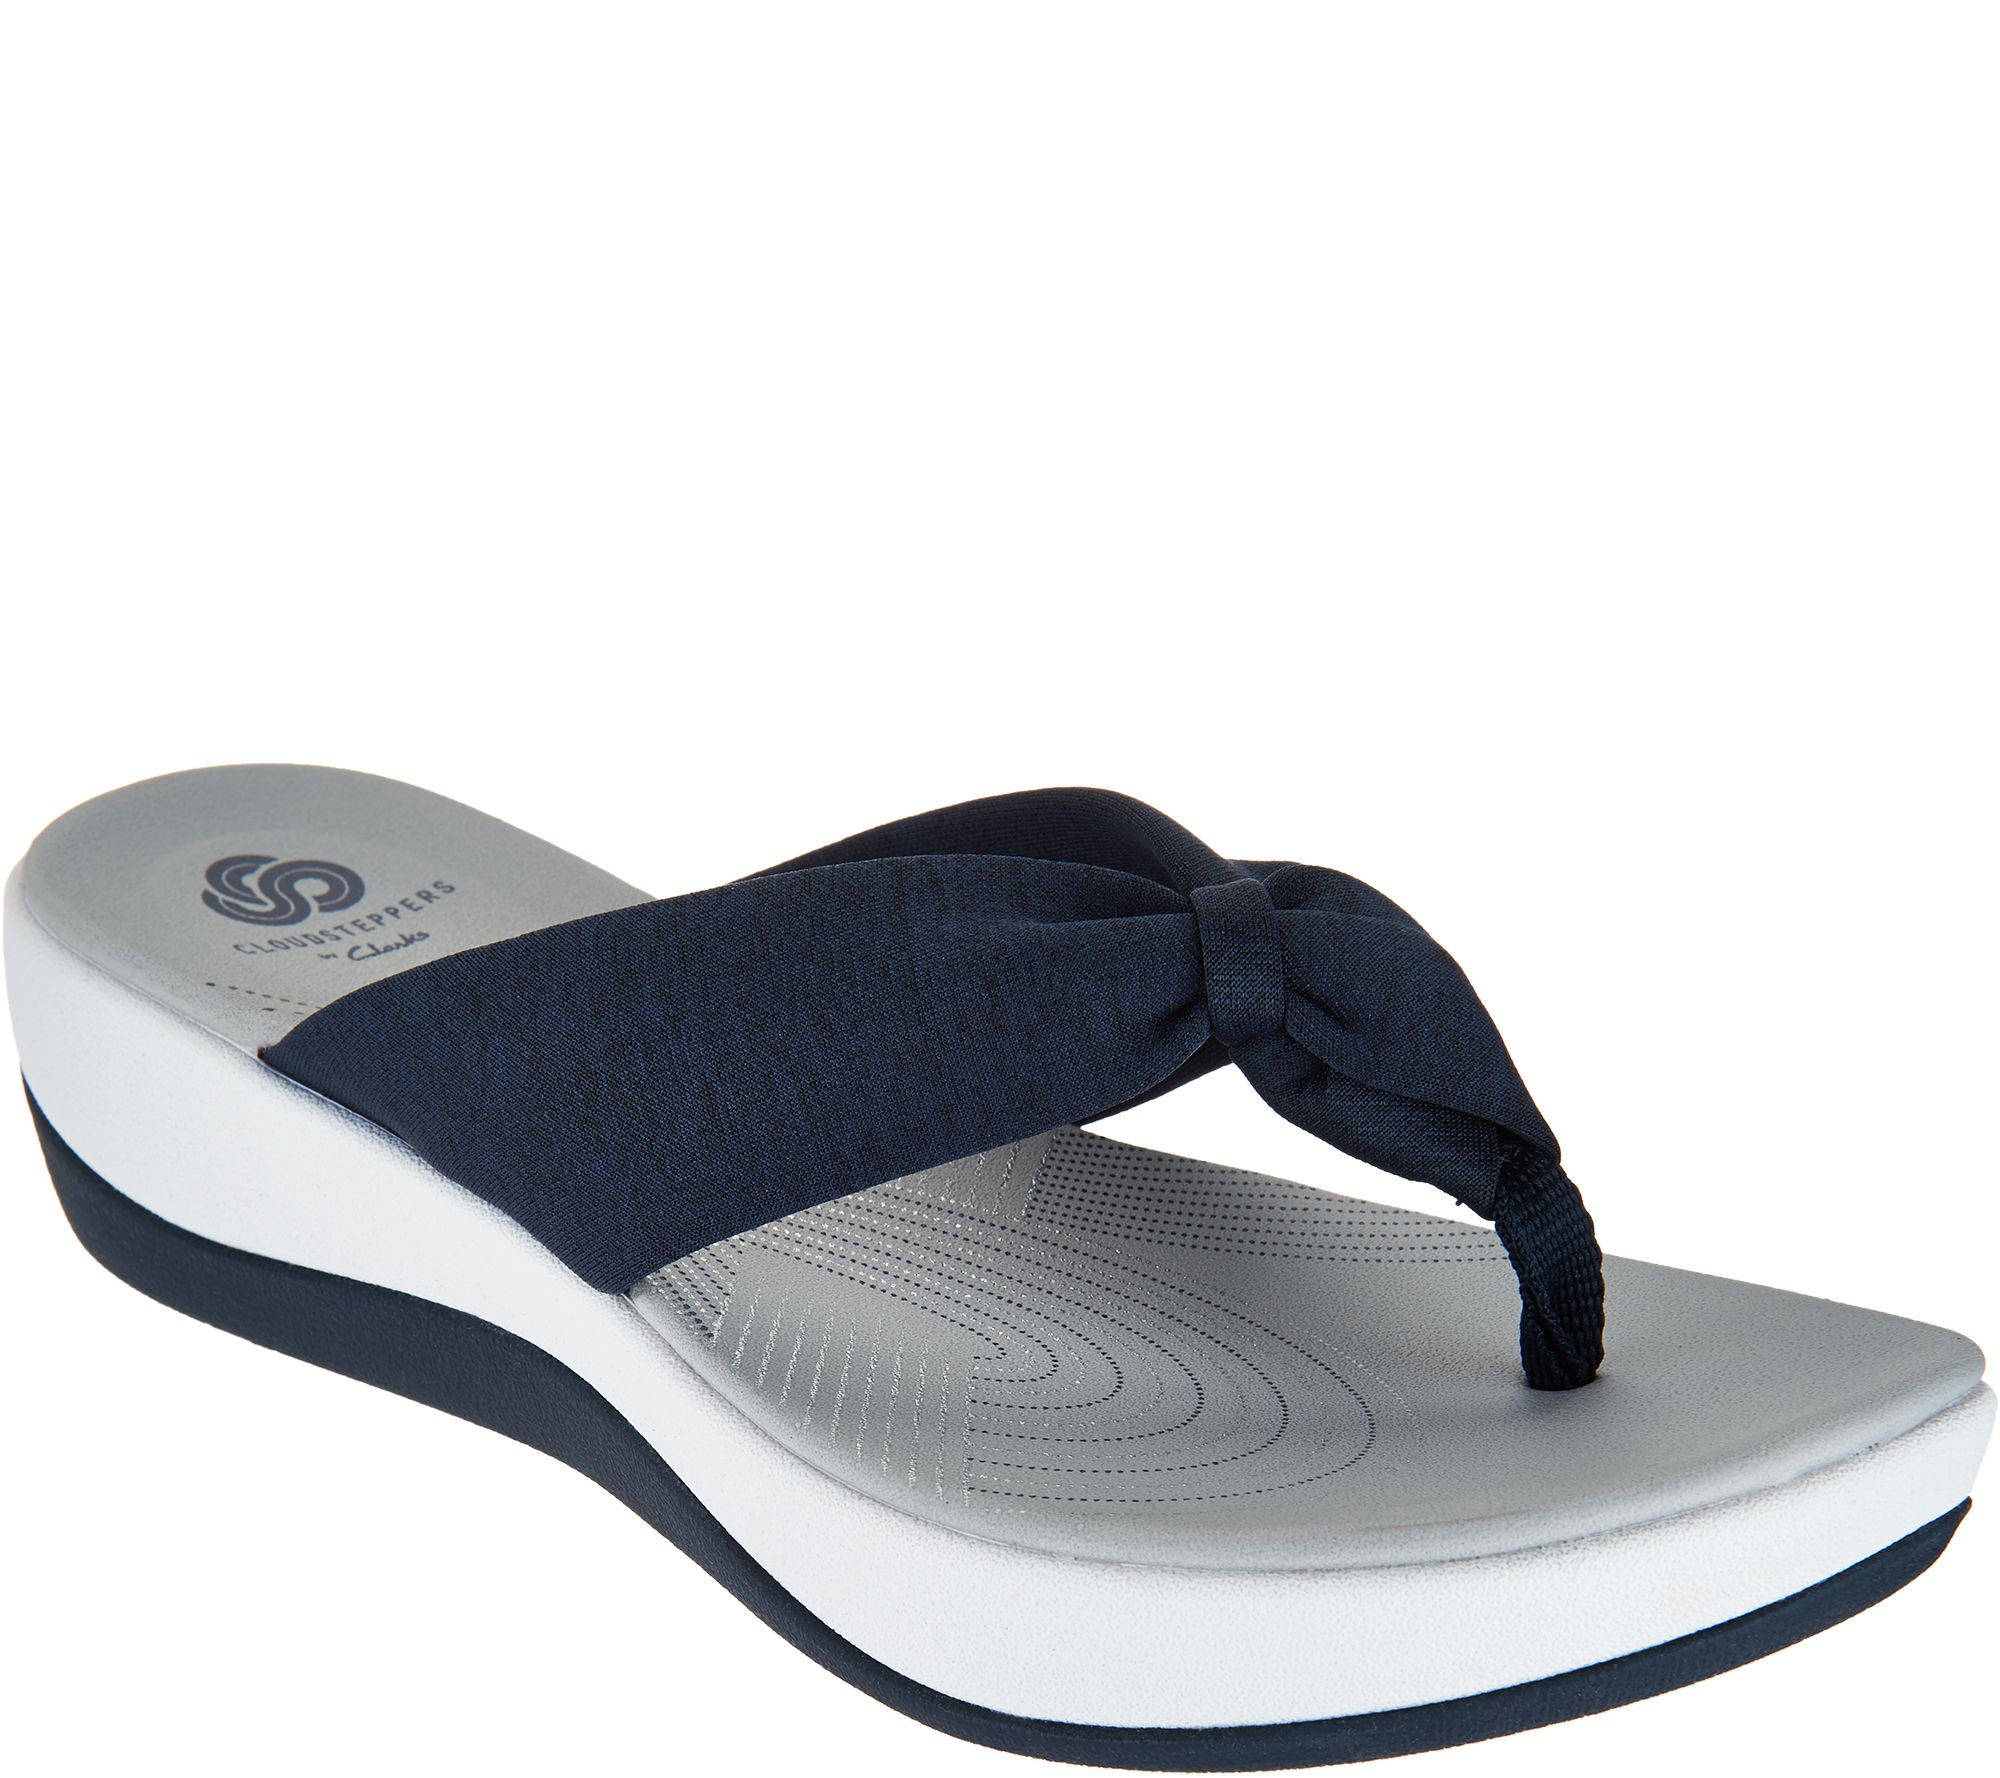 CLOUDSTEPPERS by Clarks Thong Sandals - Arla Glison - QVC.com